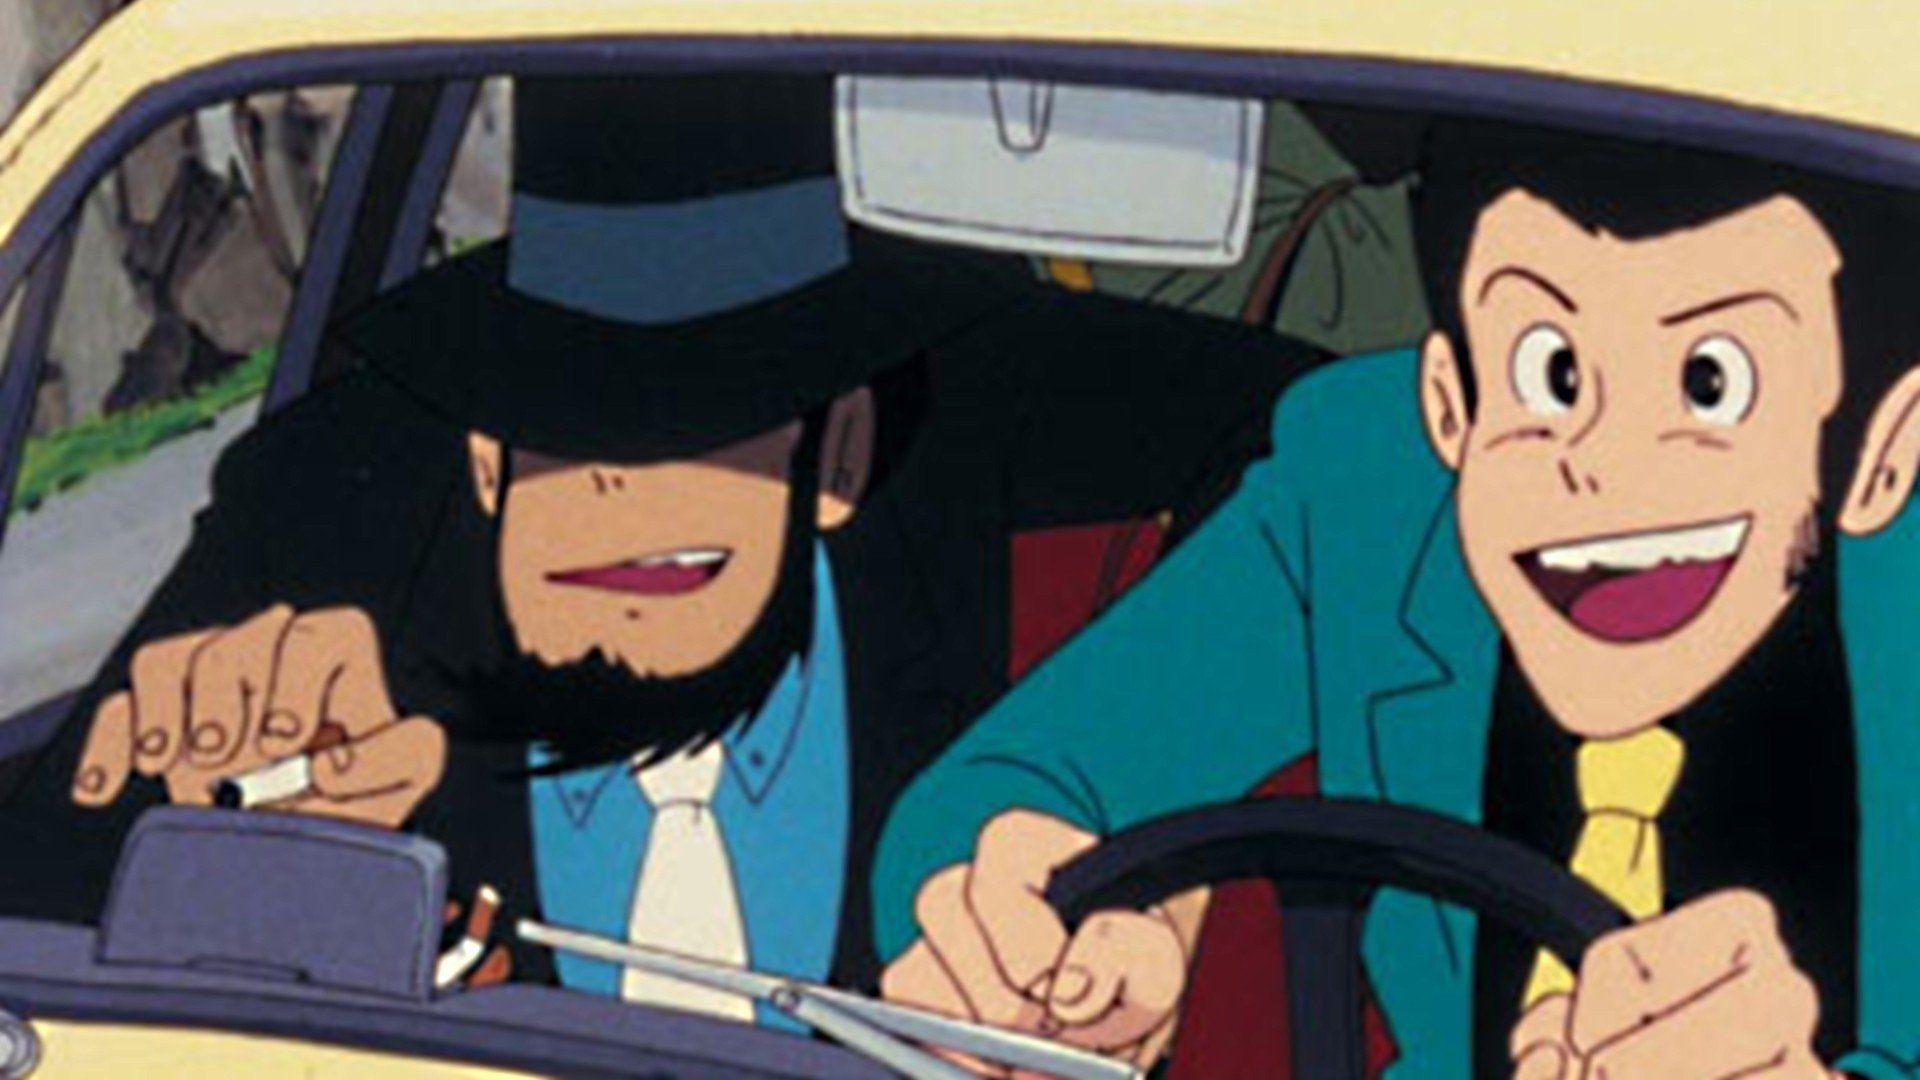 Lupin The Third Wallpaper (Picture)